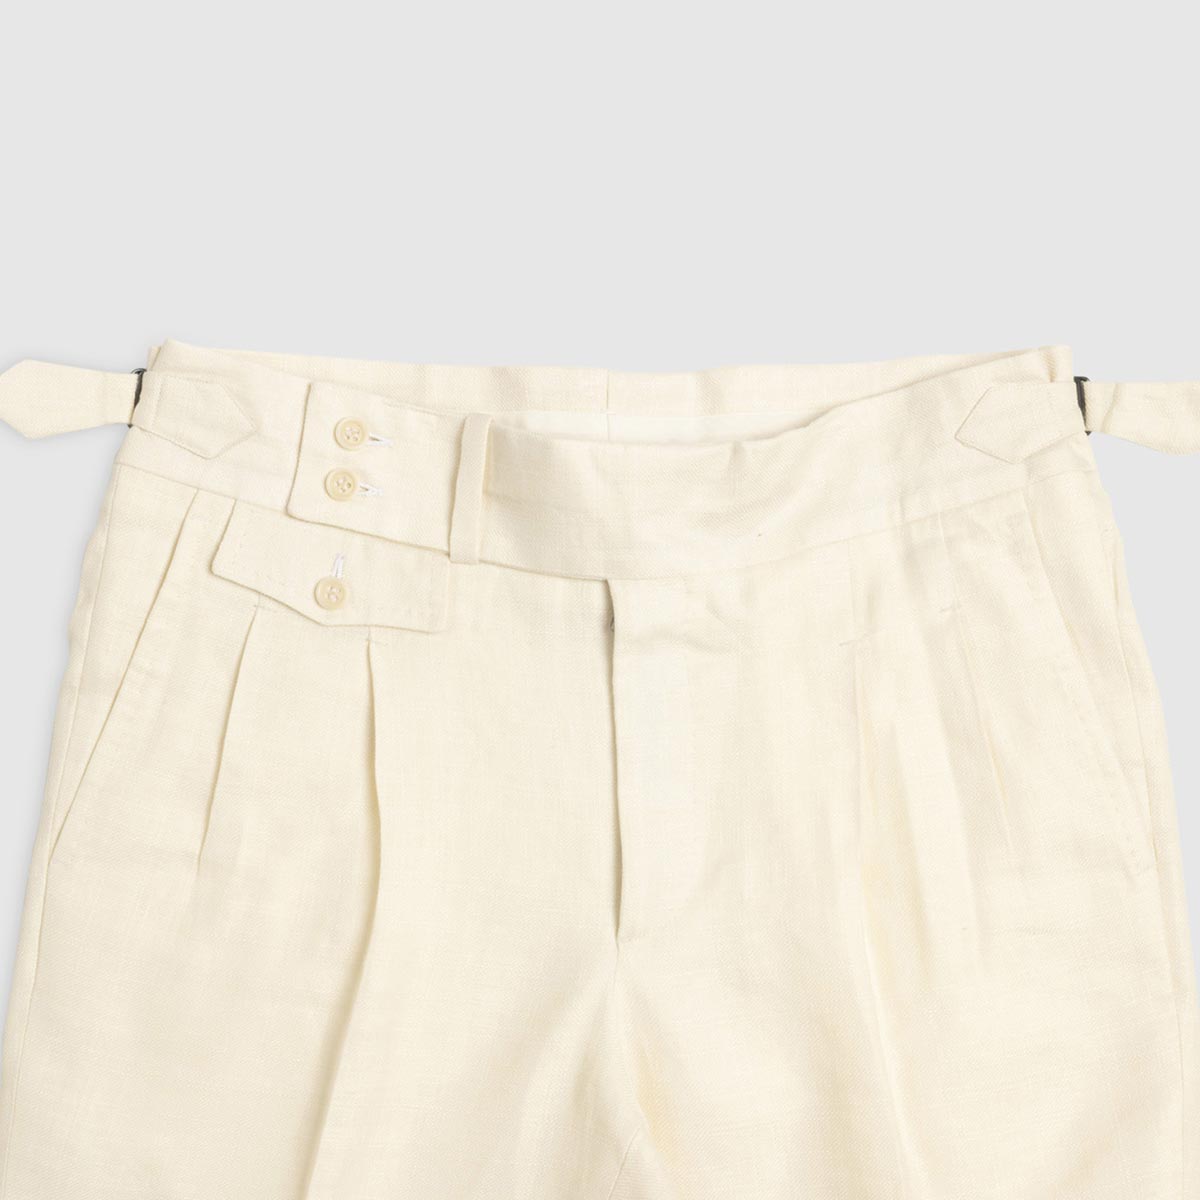 2 Pleats Trousers in Linen and Super 120’s Wool in Cream Sartoria Lavore on sale 2022 2